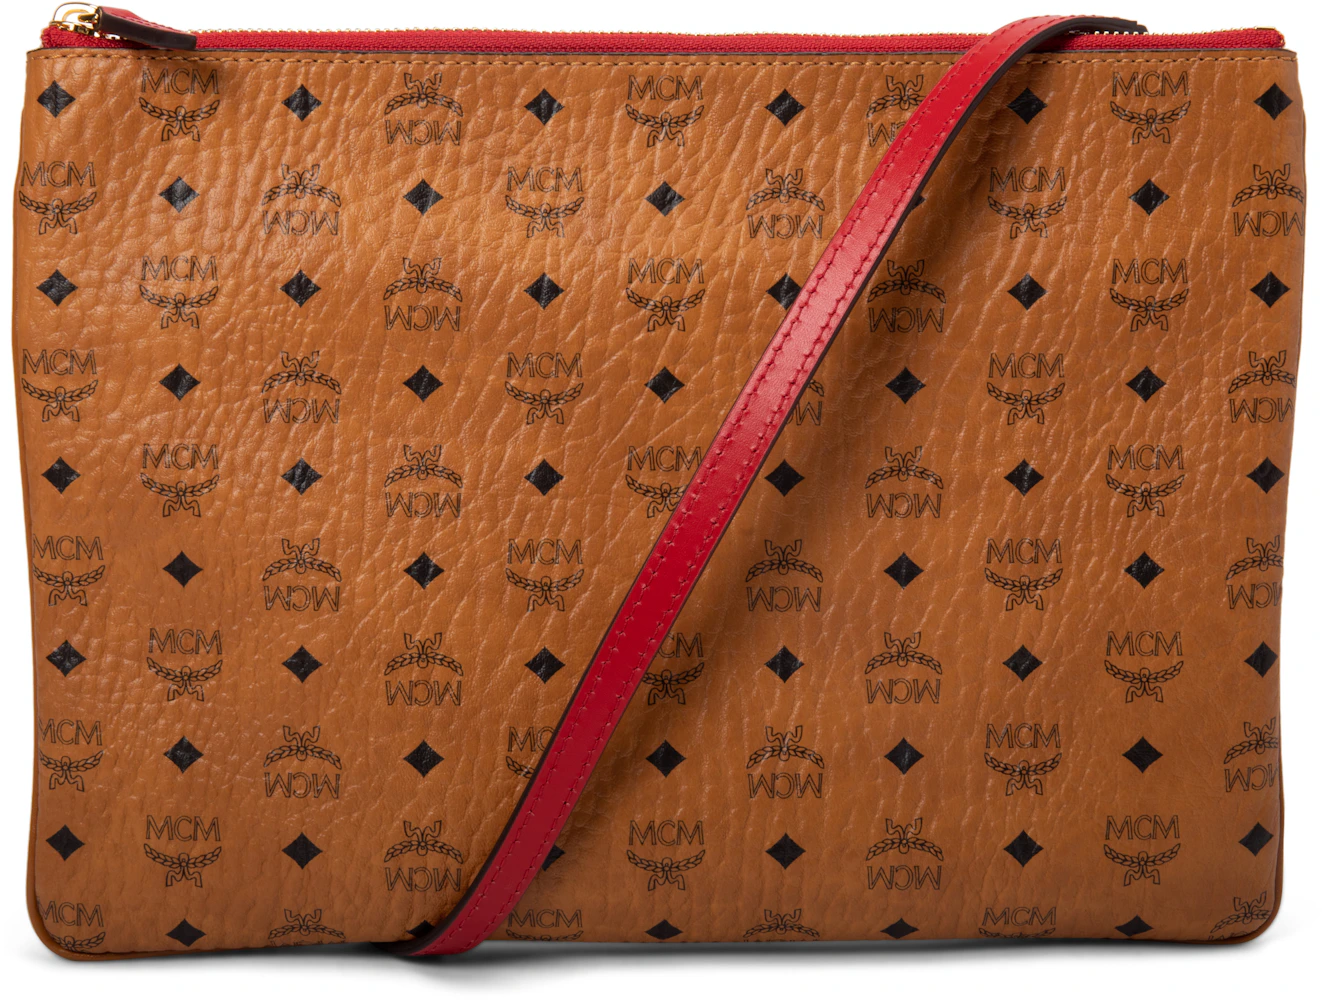 Vintage MCM Messenger from the Visetos Collection - Ruby Lane